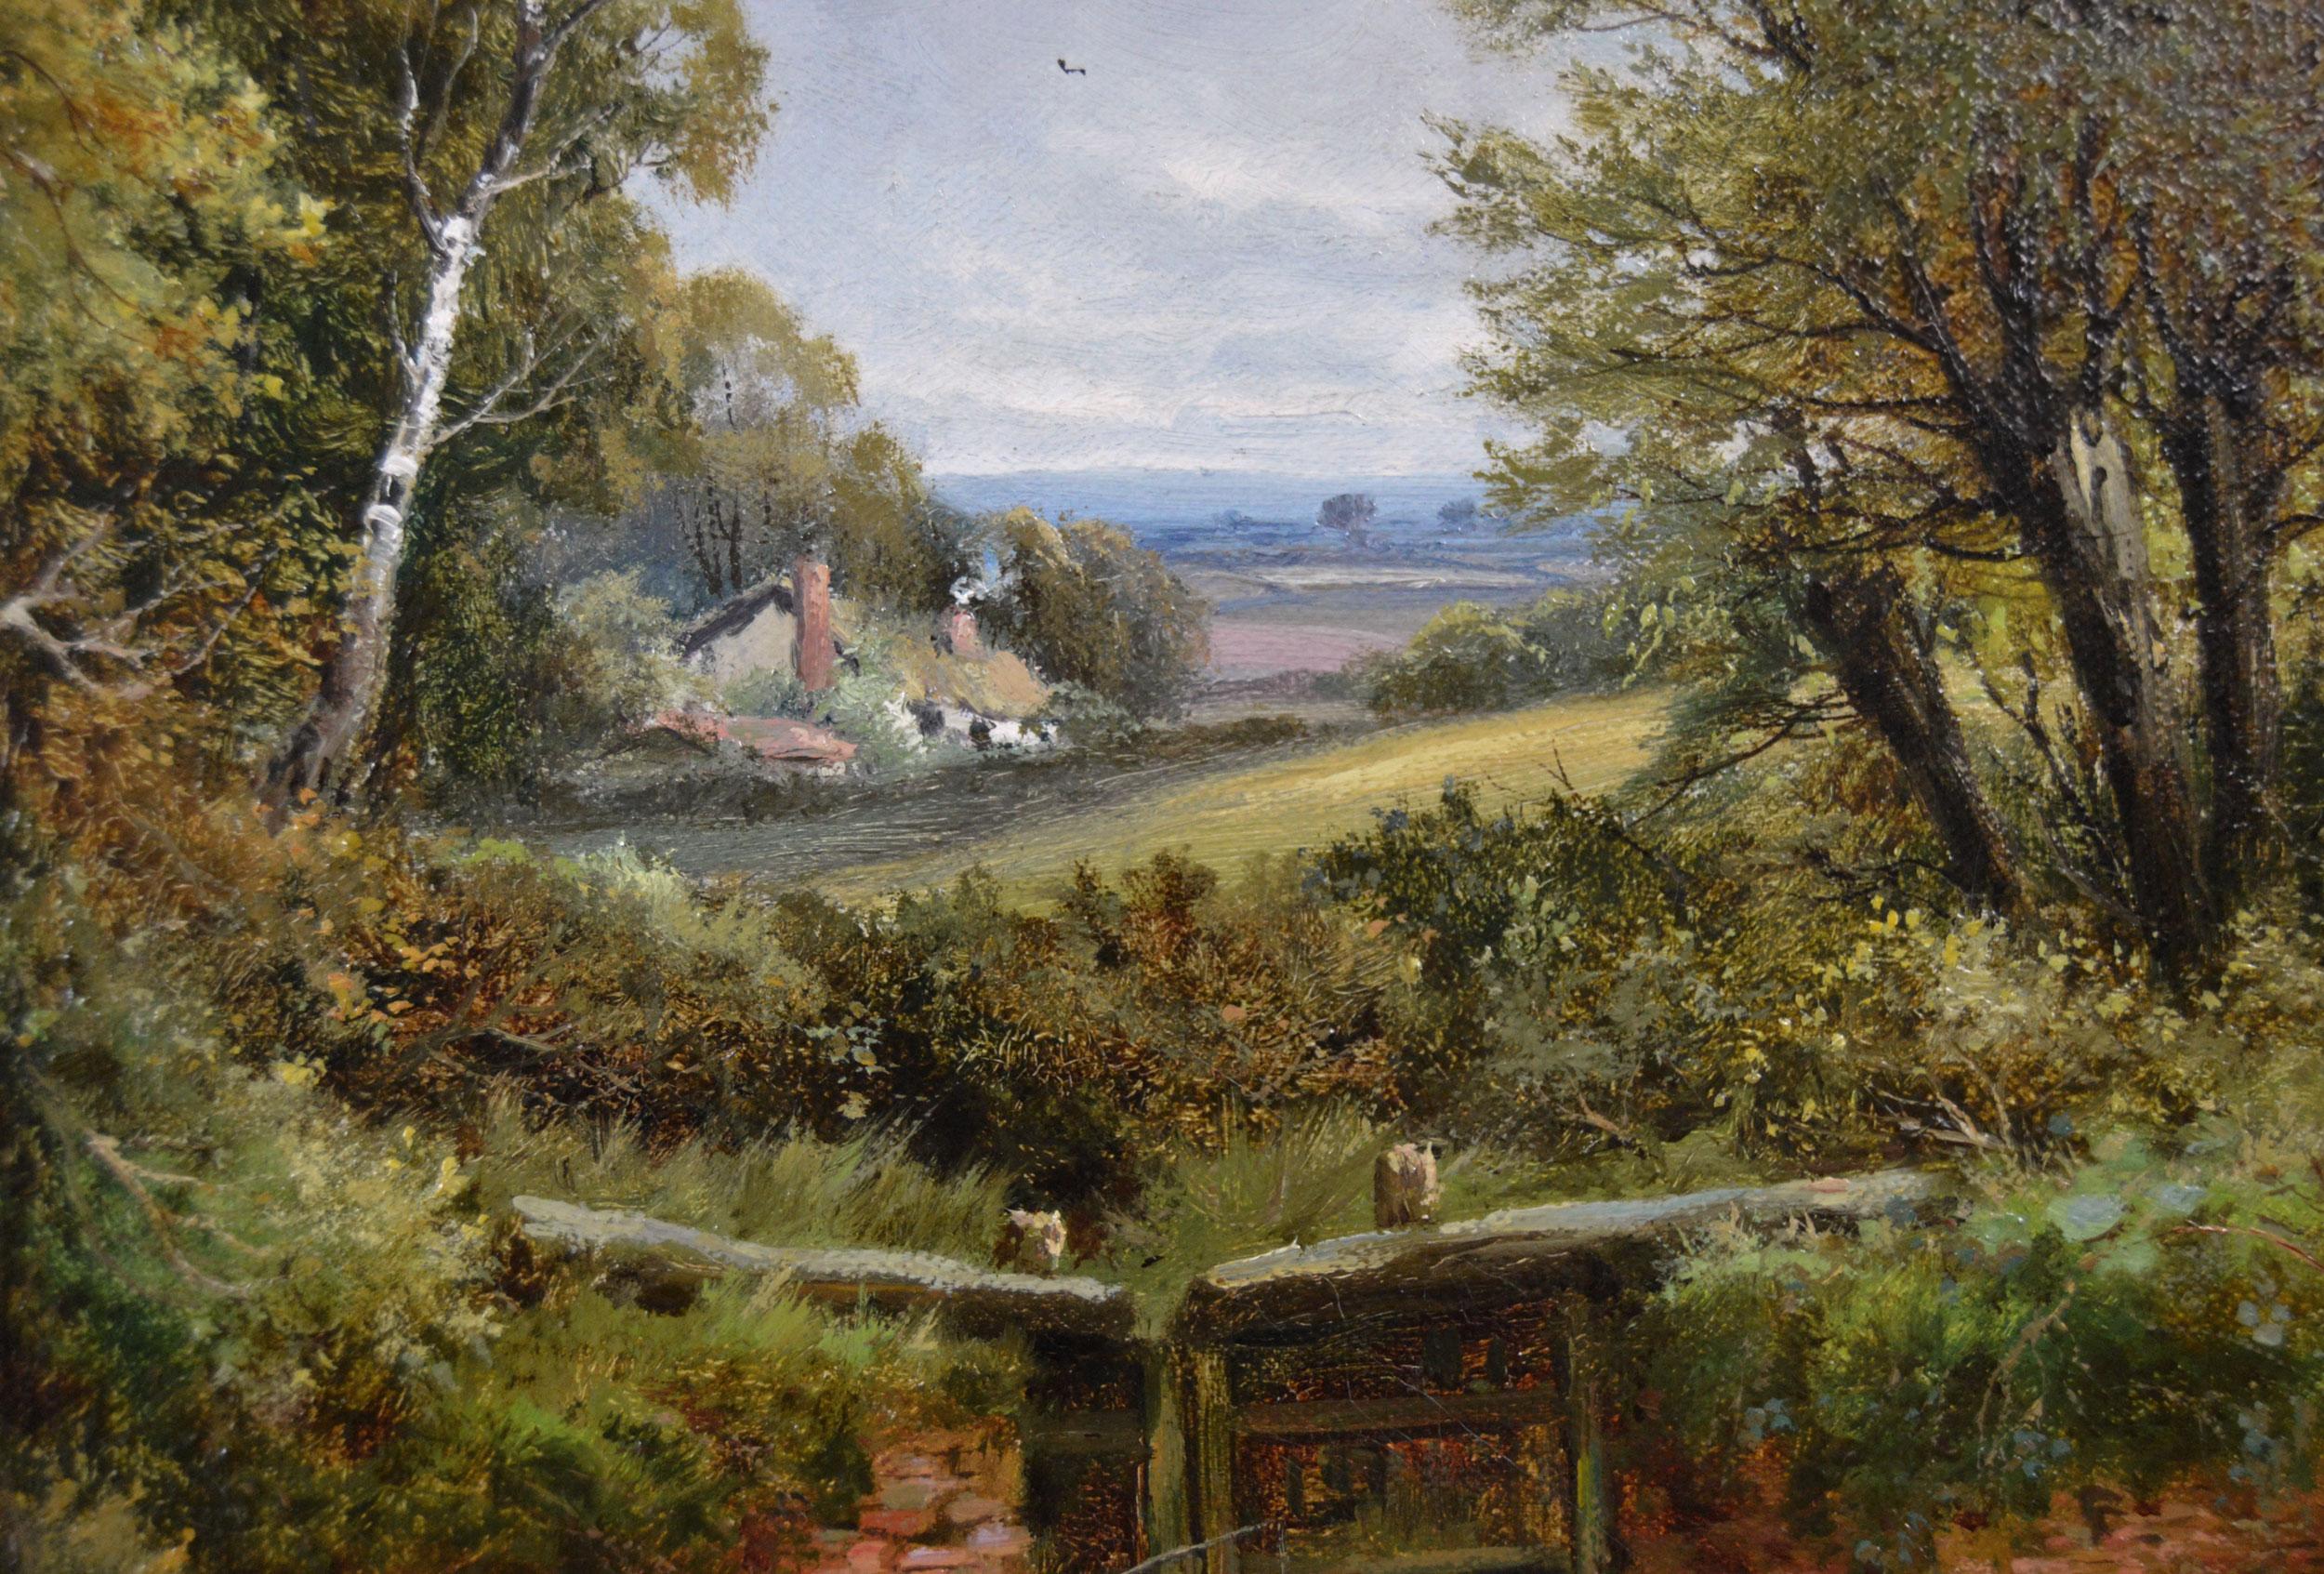 19th Century landscape oil painting of figures fishing by a river lock  - Brown Landscape Painting by Robert John Hammond